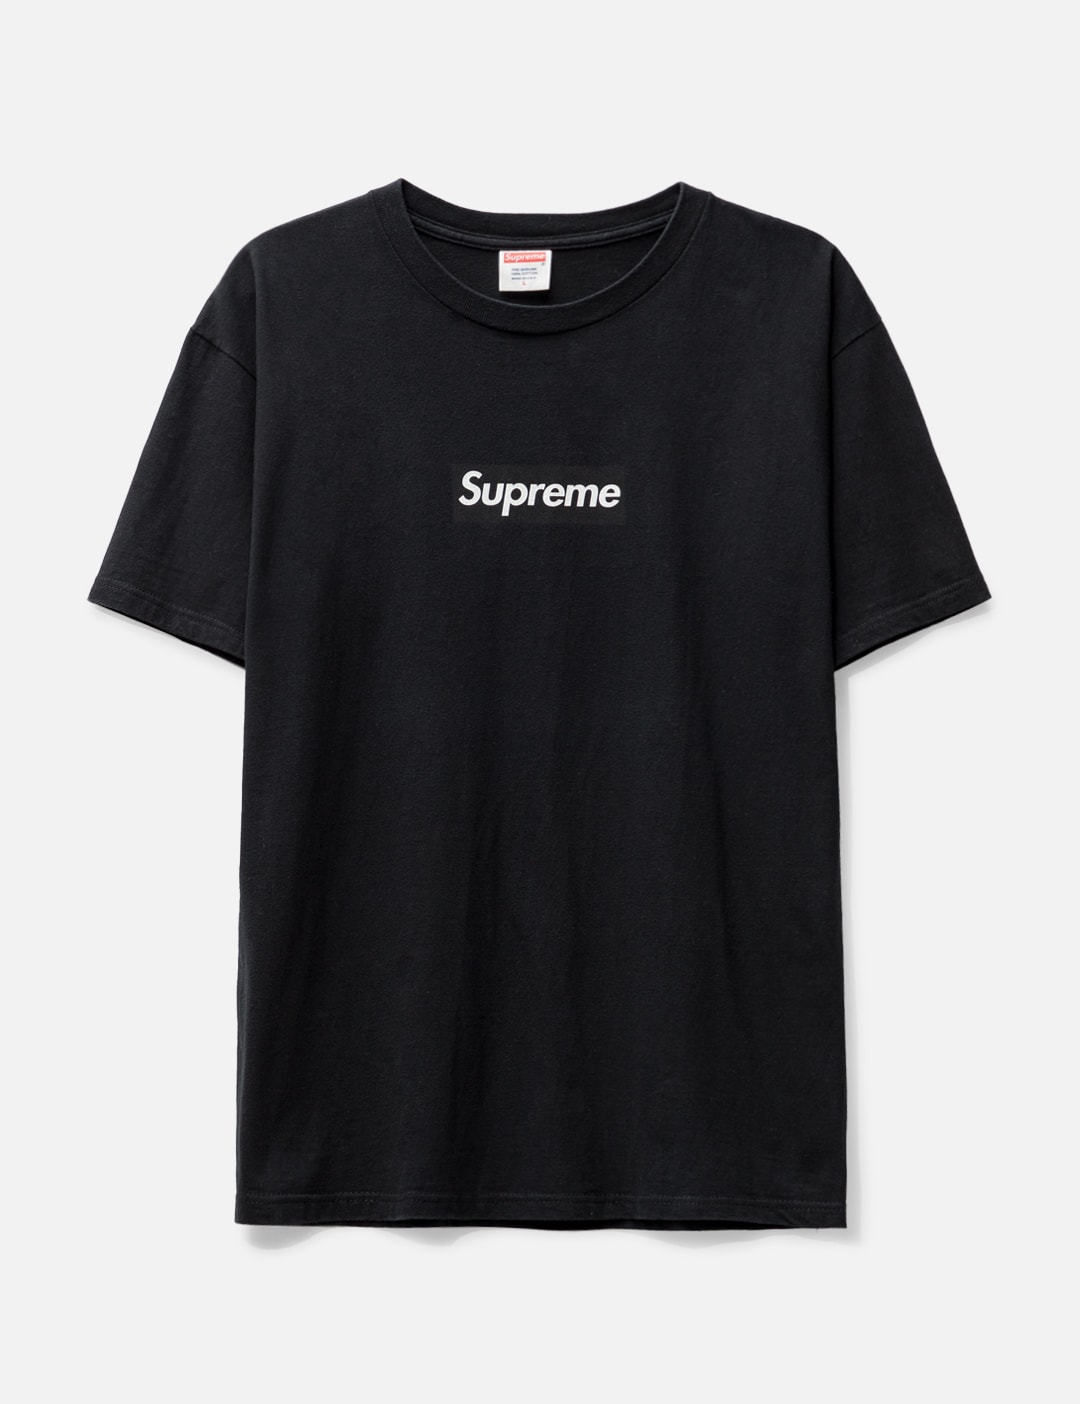 hydrogen Pastor Hollow Supreme - SUPREME FRIENDS AND FAMILY BLACK ON BLACK BOX LOGO T-SHIRT | HBX  - Globally Curated Fashion and Lifestyle by Hypebeast